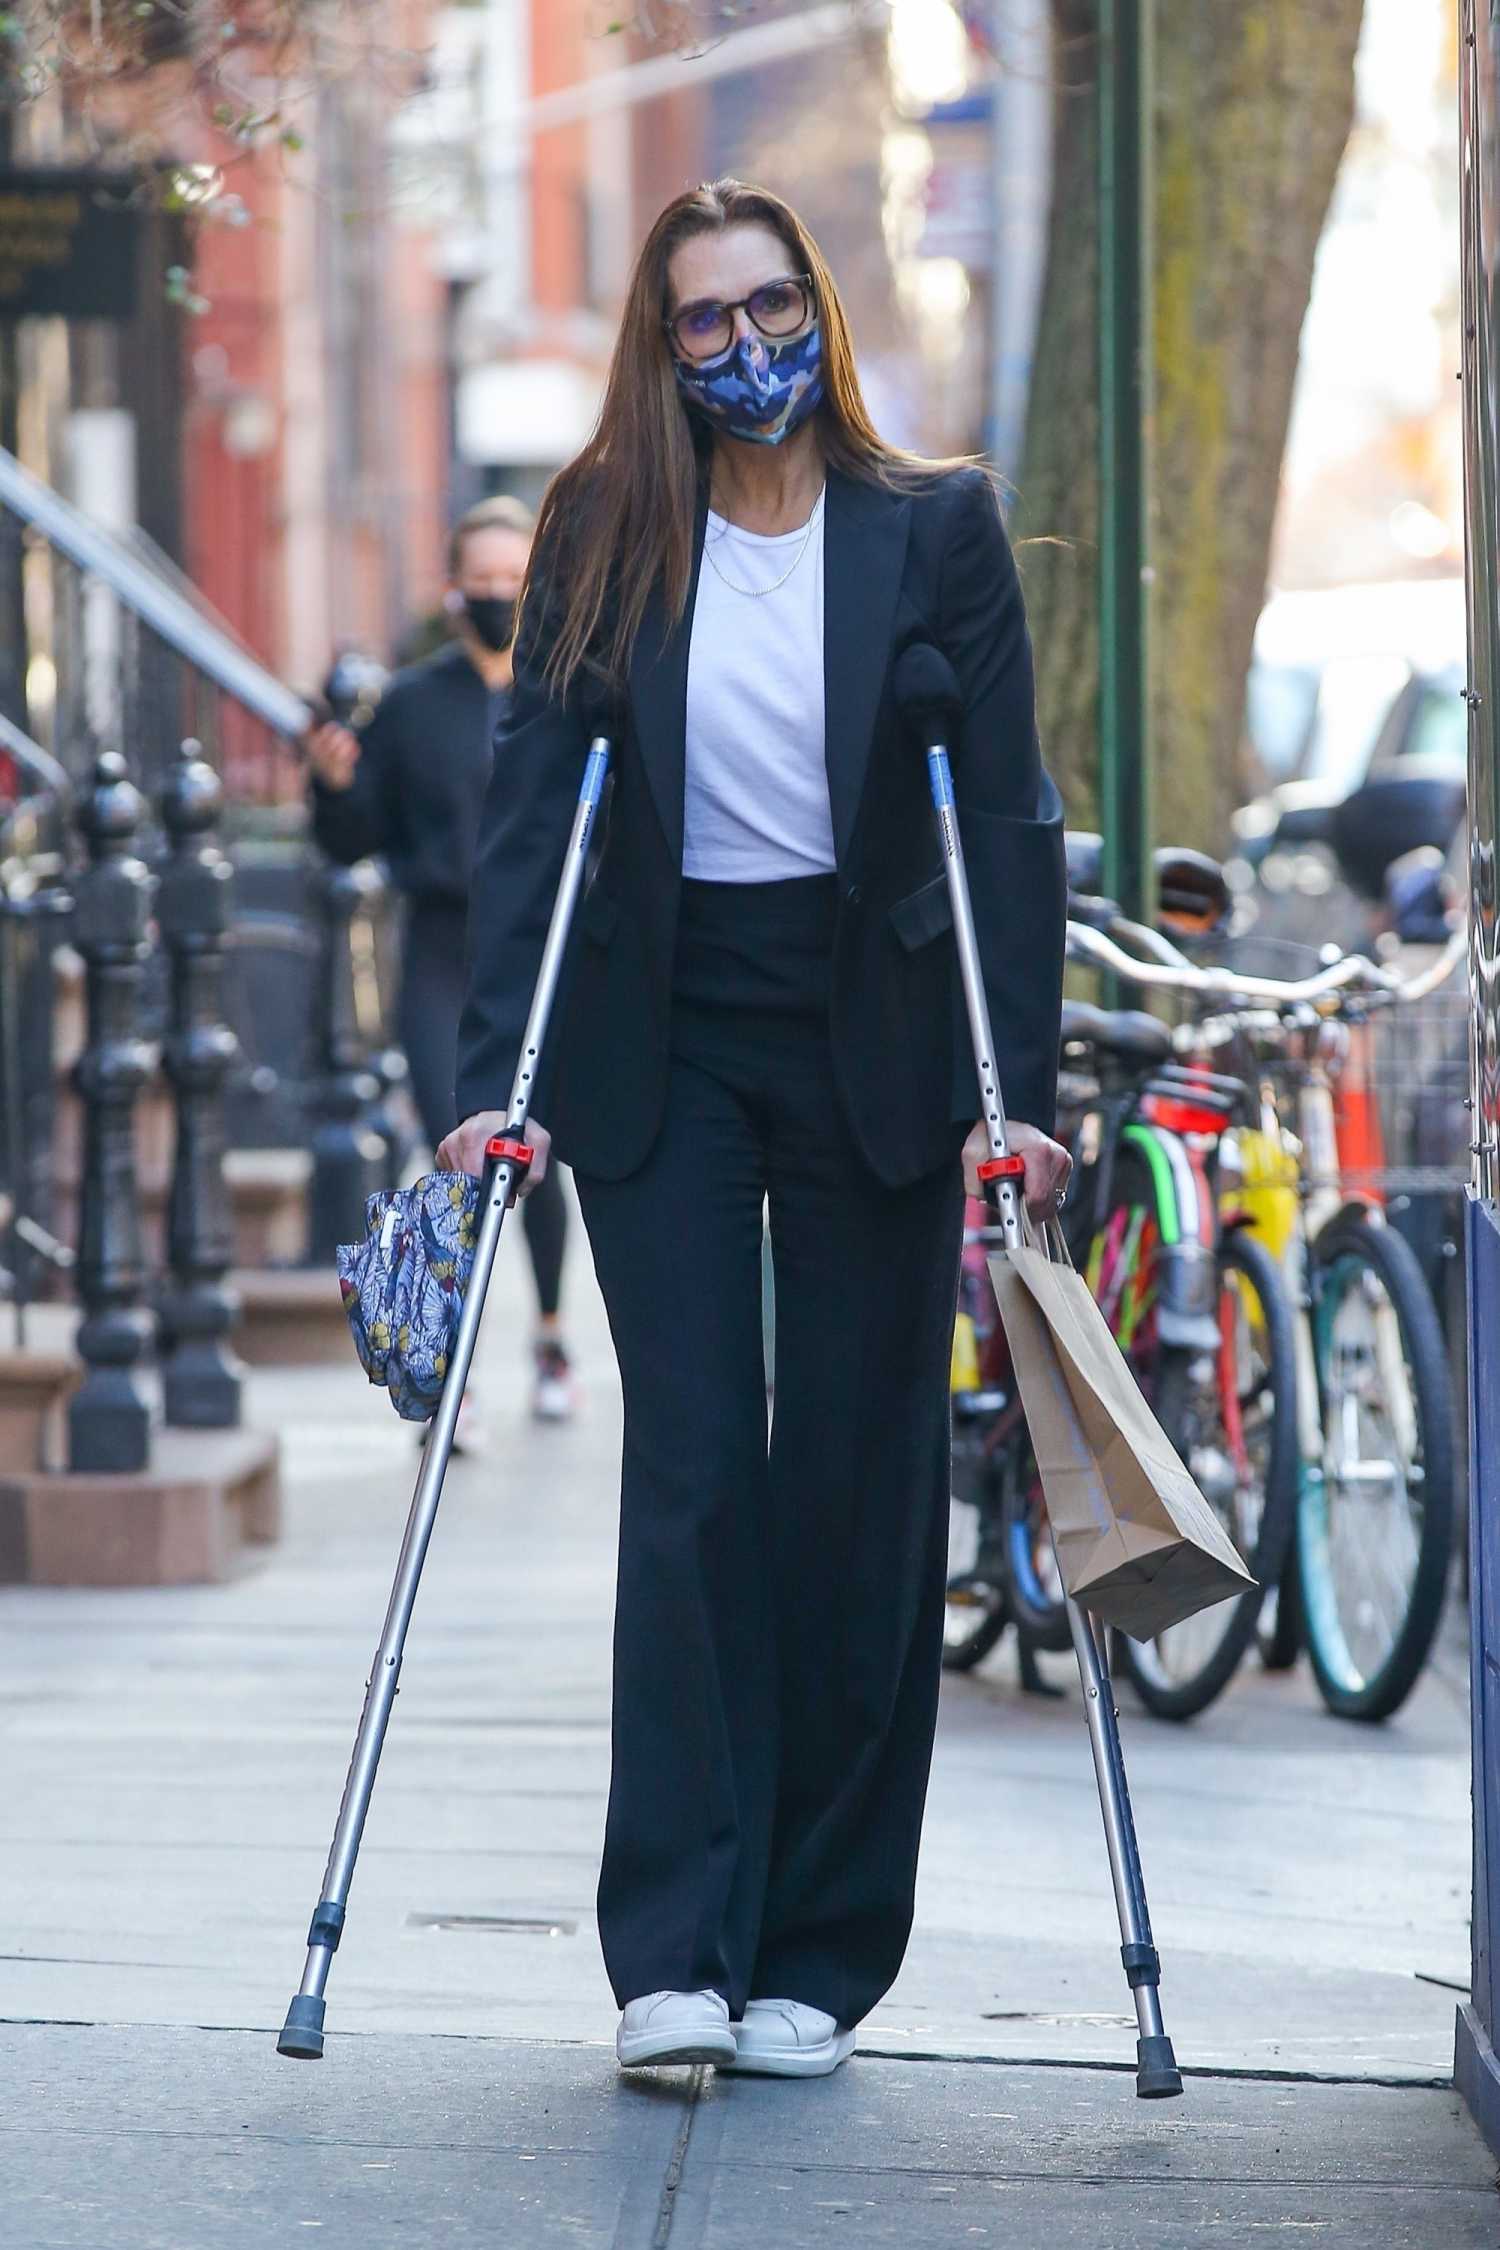 Brooke Shields on Crutches Was Seen Out with a Friend in 